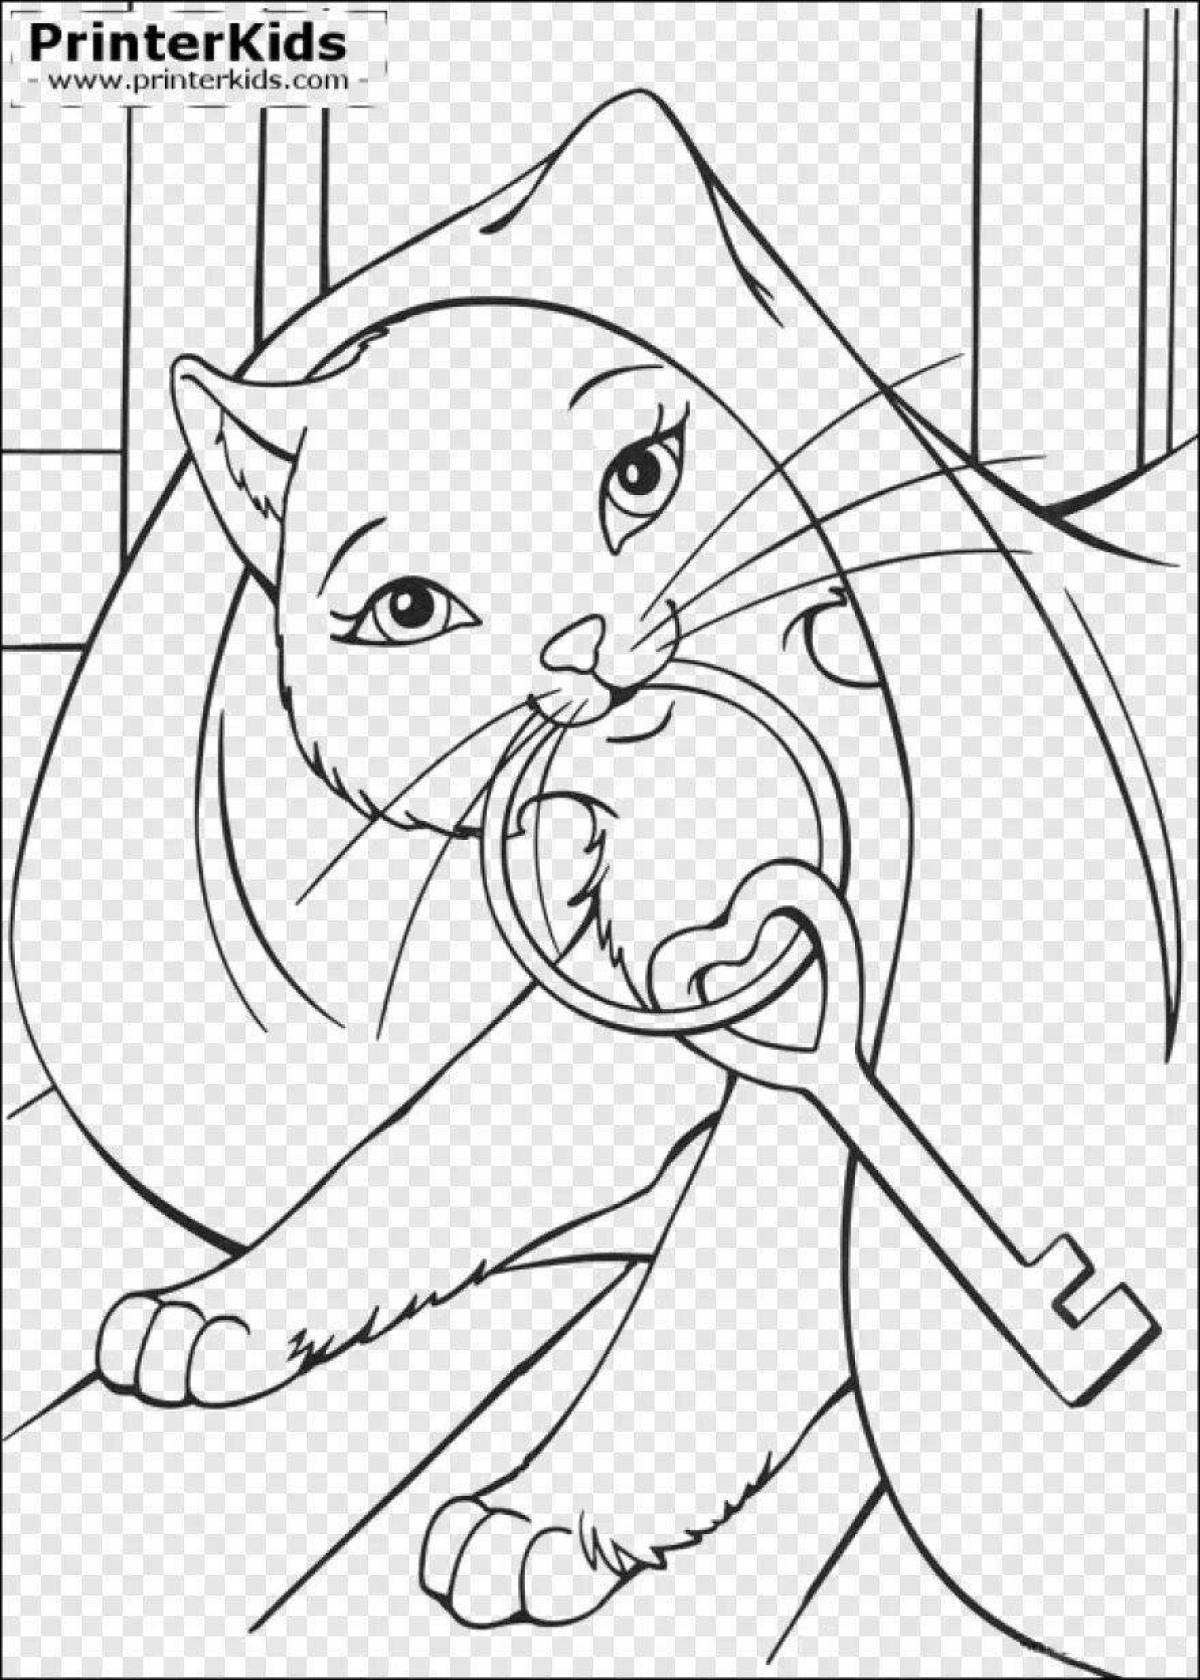 Coloring page adorable barbie with a cat